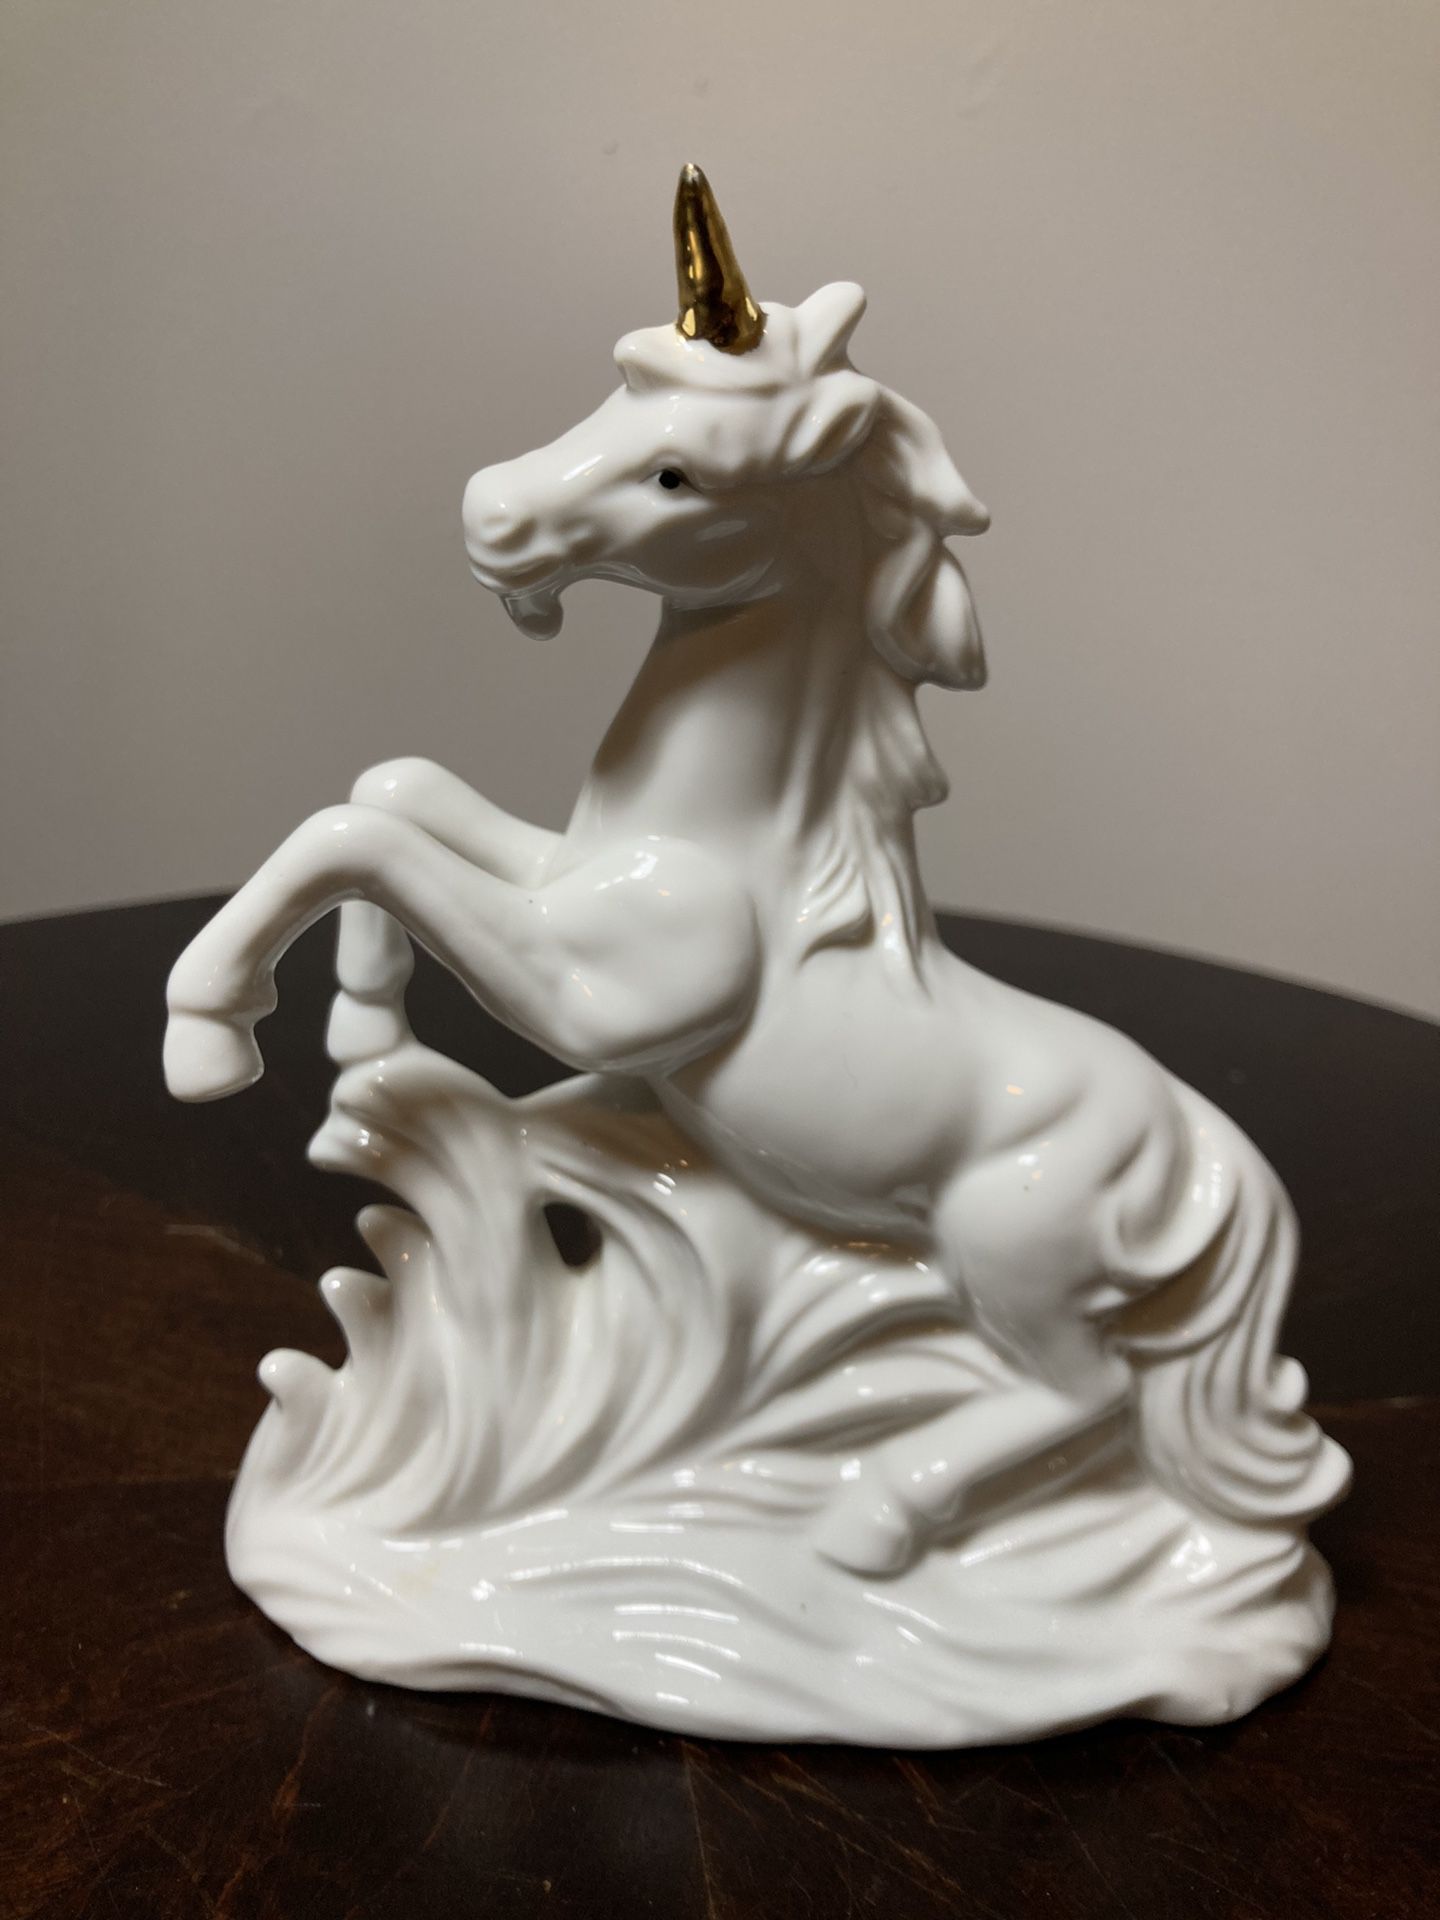 Porcelain Unicorn Gold Horn figurine Price Products Made in Taiwan Collectible